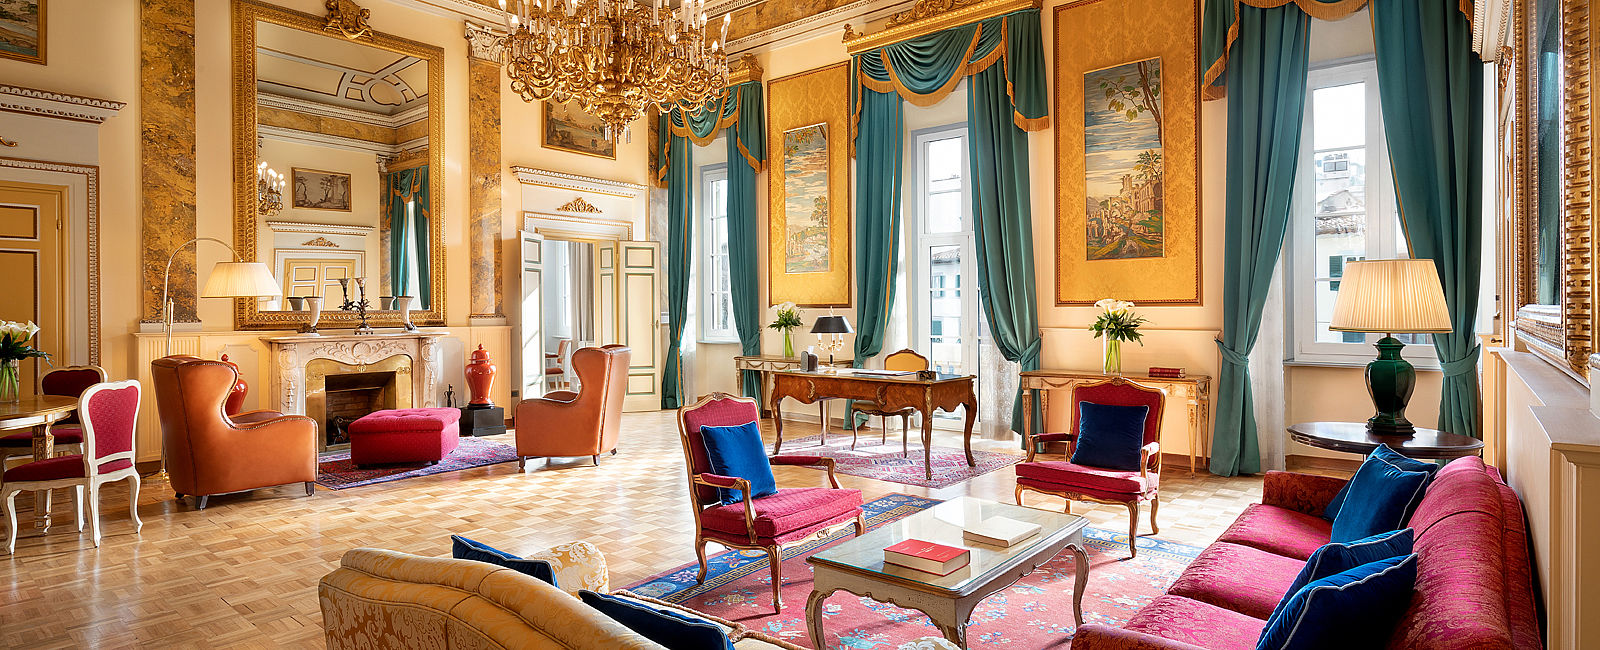 HOTEL ANGEBOTE
 Sina Villa Medici, Autograph Collection: Experience Suite Package 
